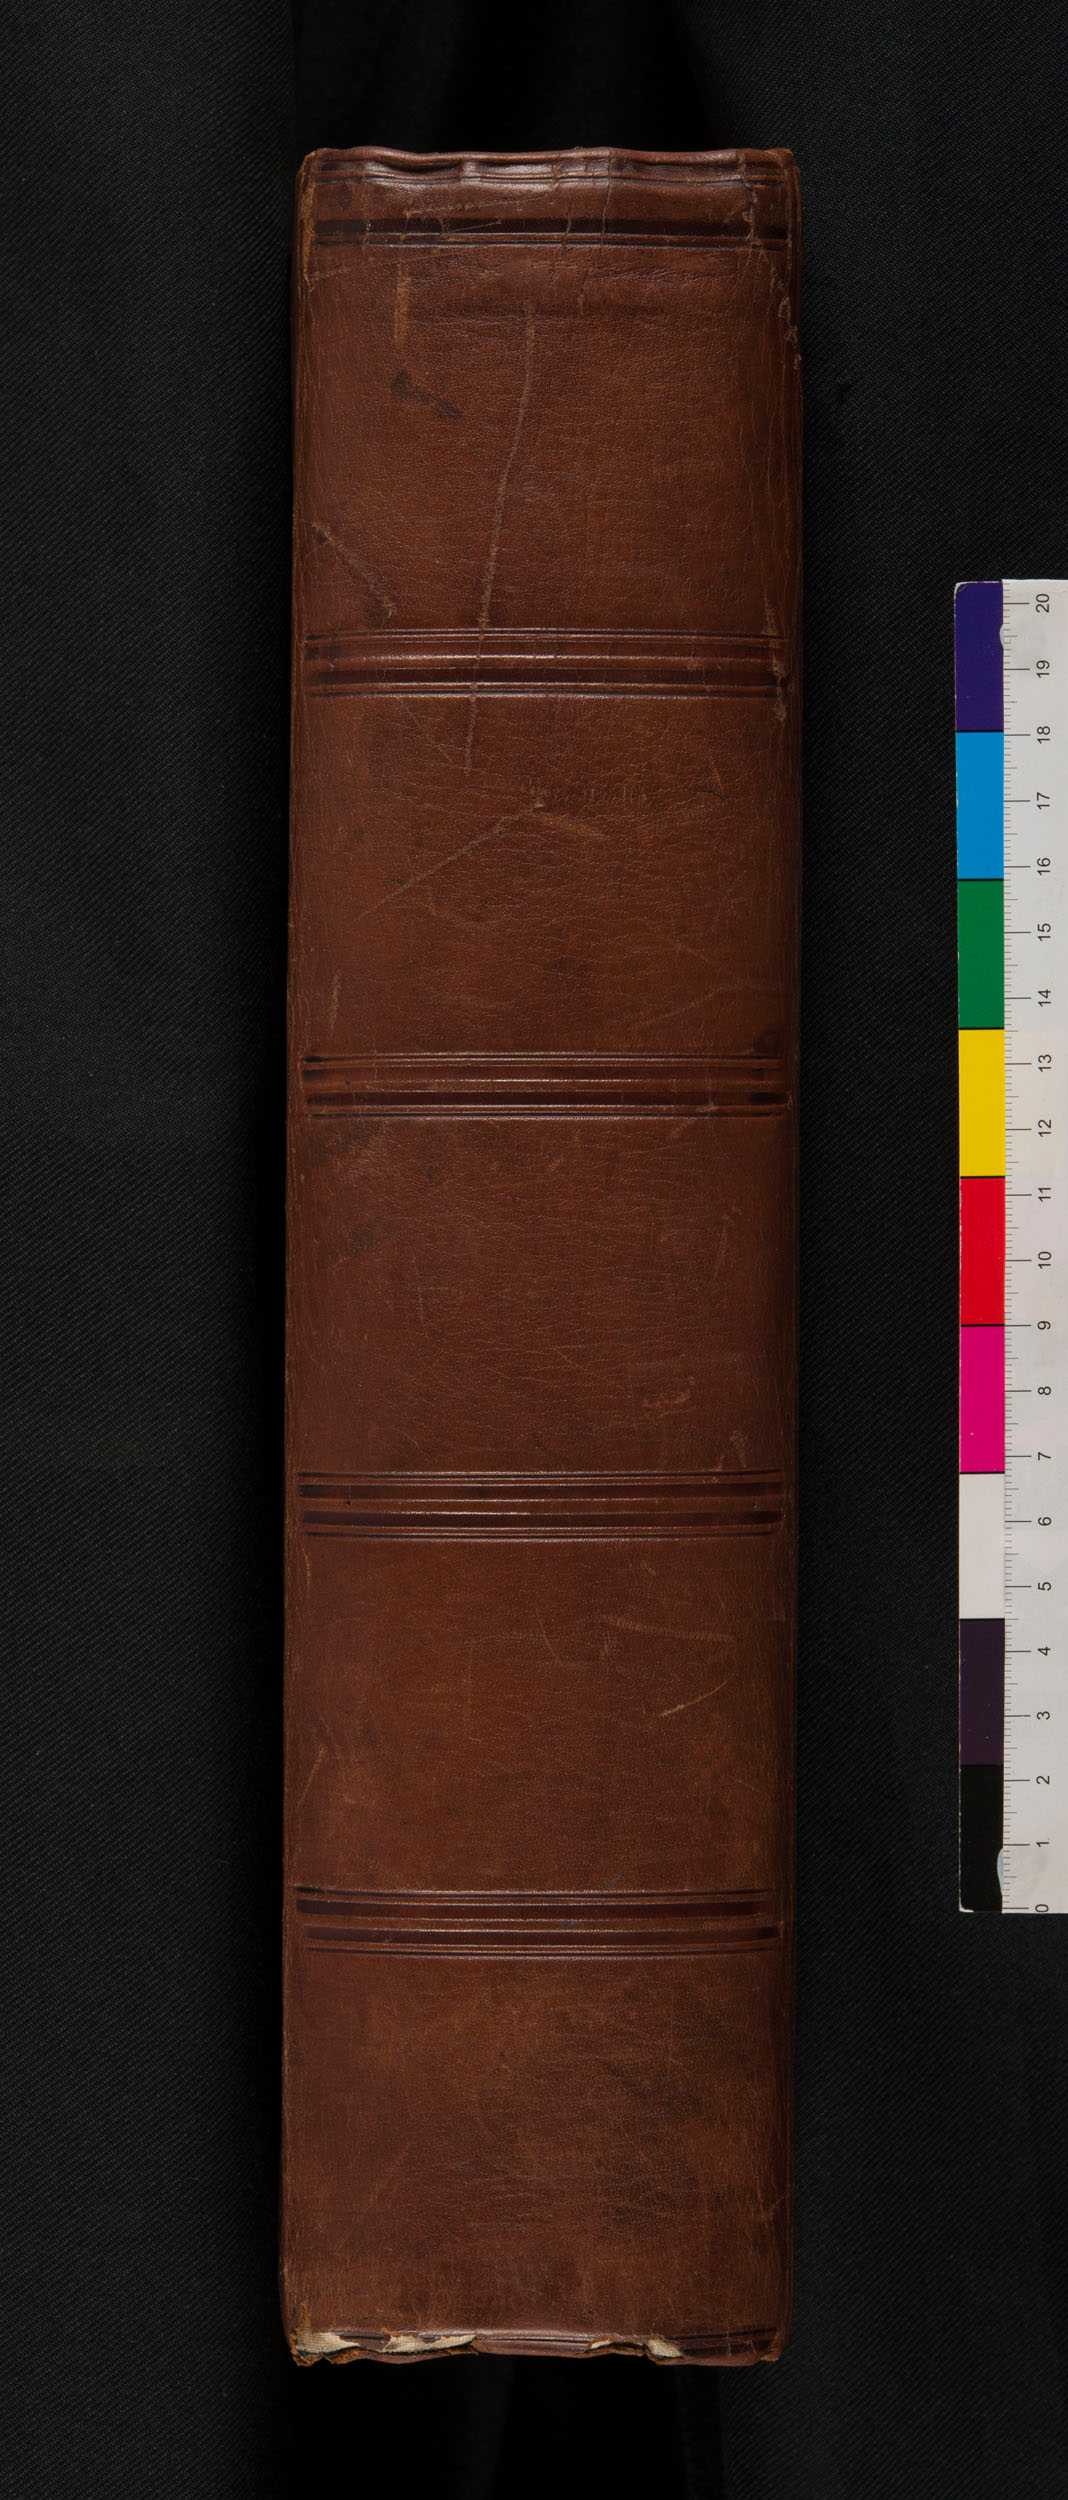 An image of the spine of the Unyanyembe Journal (Livingstone 1866-72:[775]). Copyright David Livingstone Centre. Creative Commons Attribution-NonCommercial 3.0 Unported (https://creativecommons.org/licenses/by-nc/3.0/).